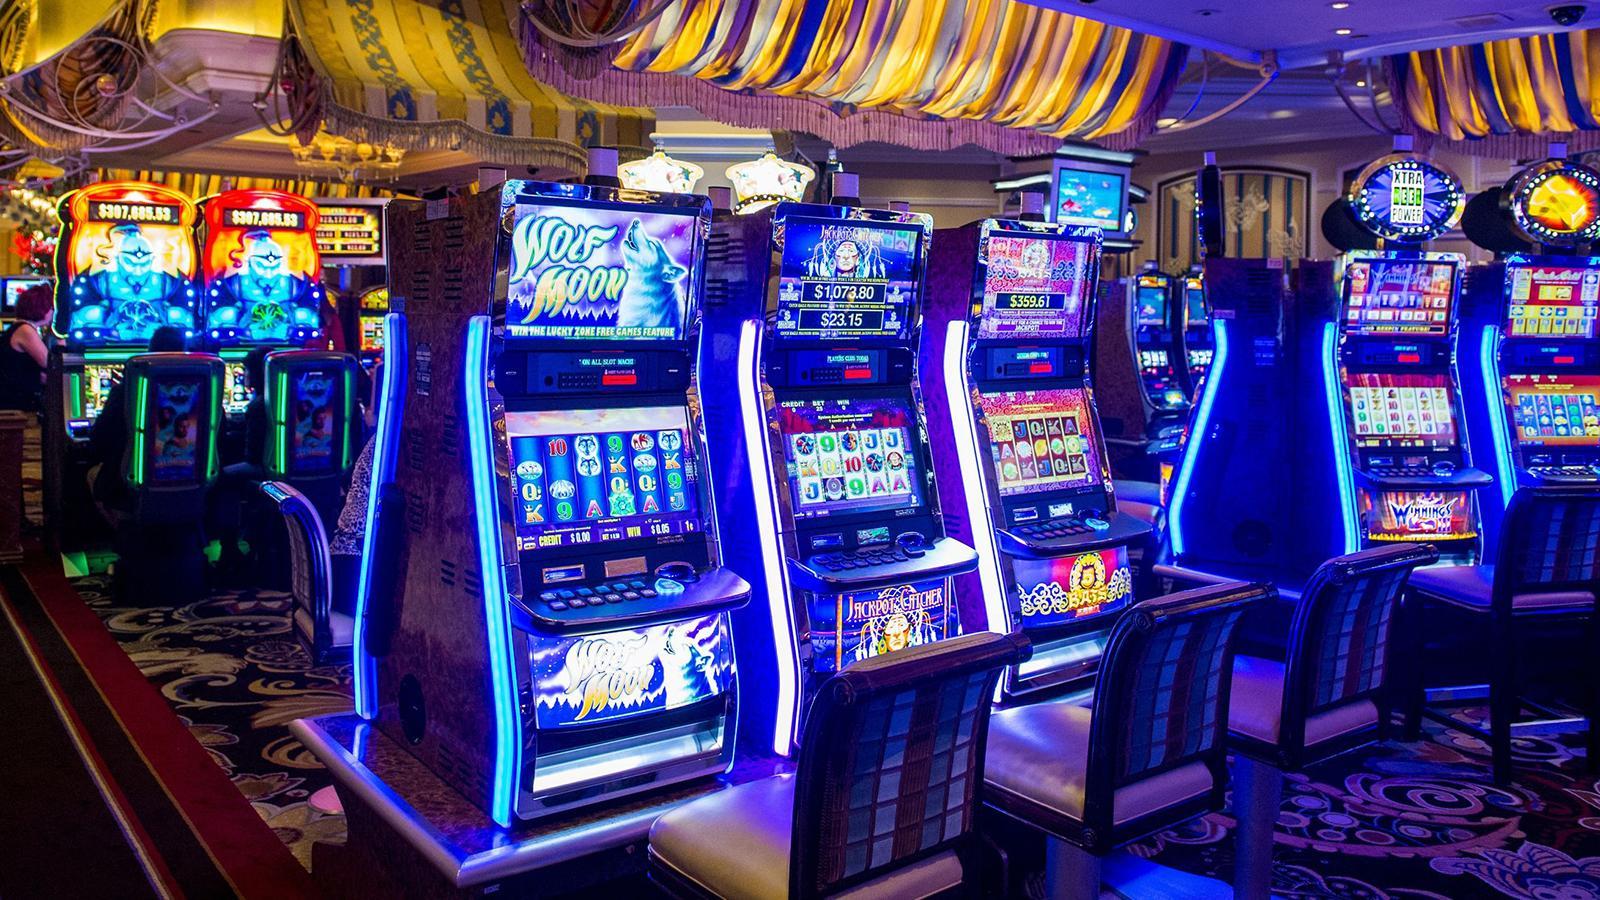 From Classic to Progressive: Which Slot Games Hold the Key to Big Wins?